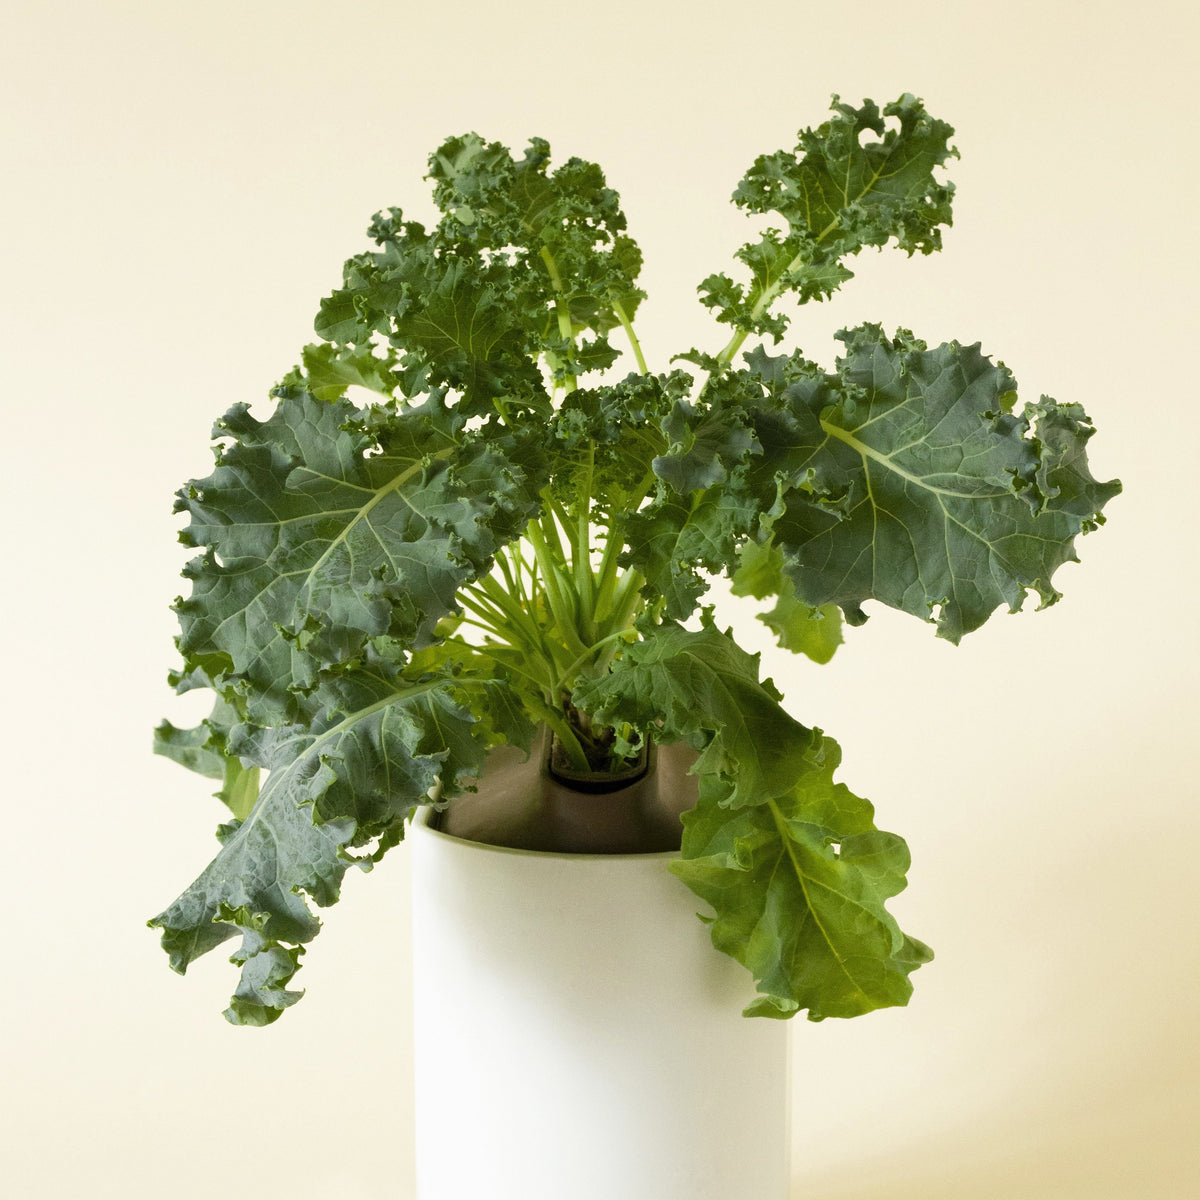 Curly Kale